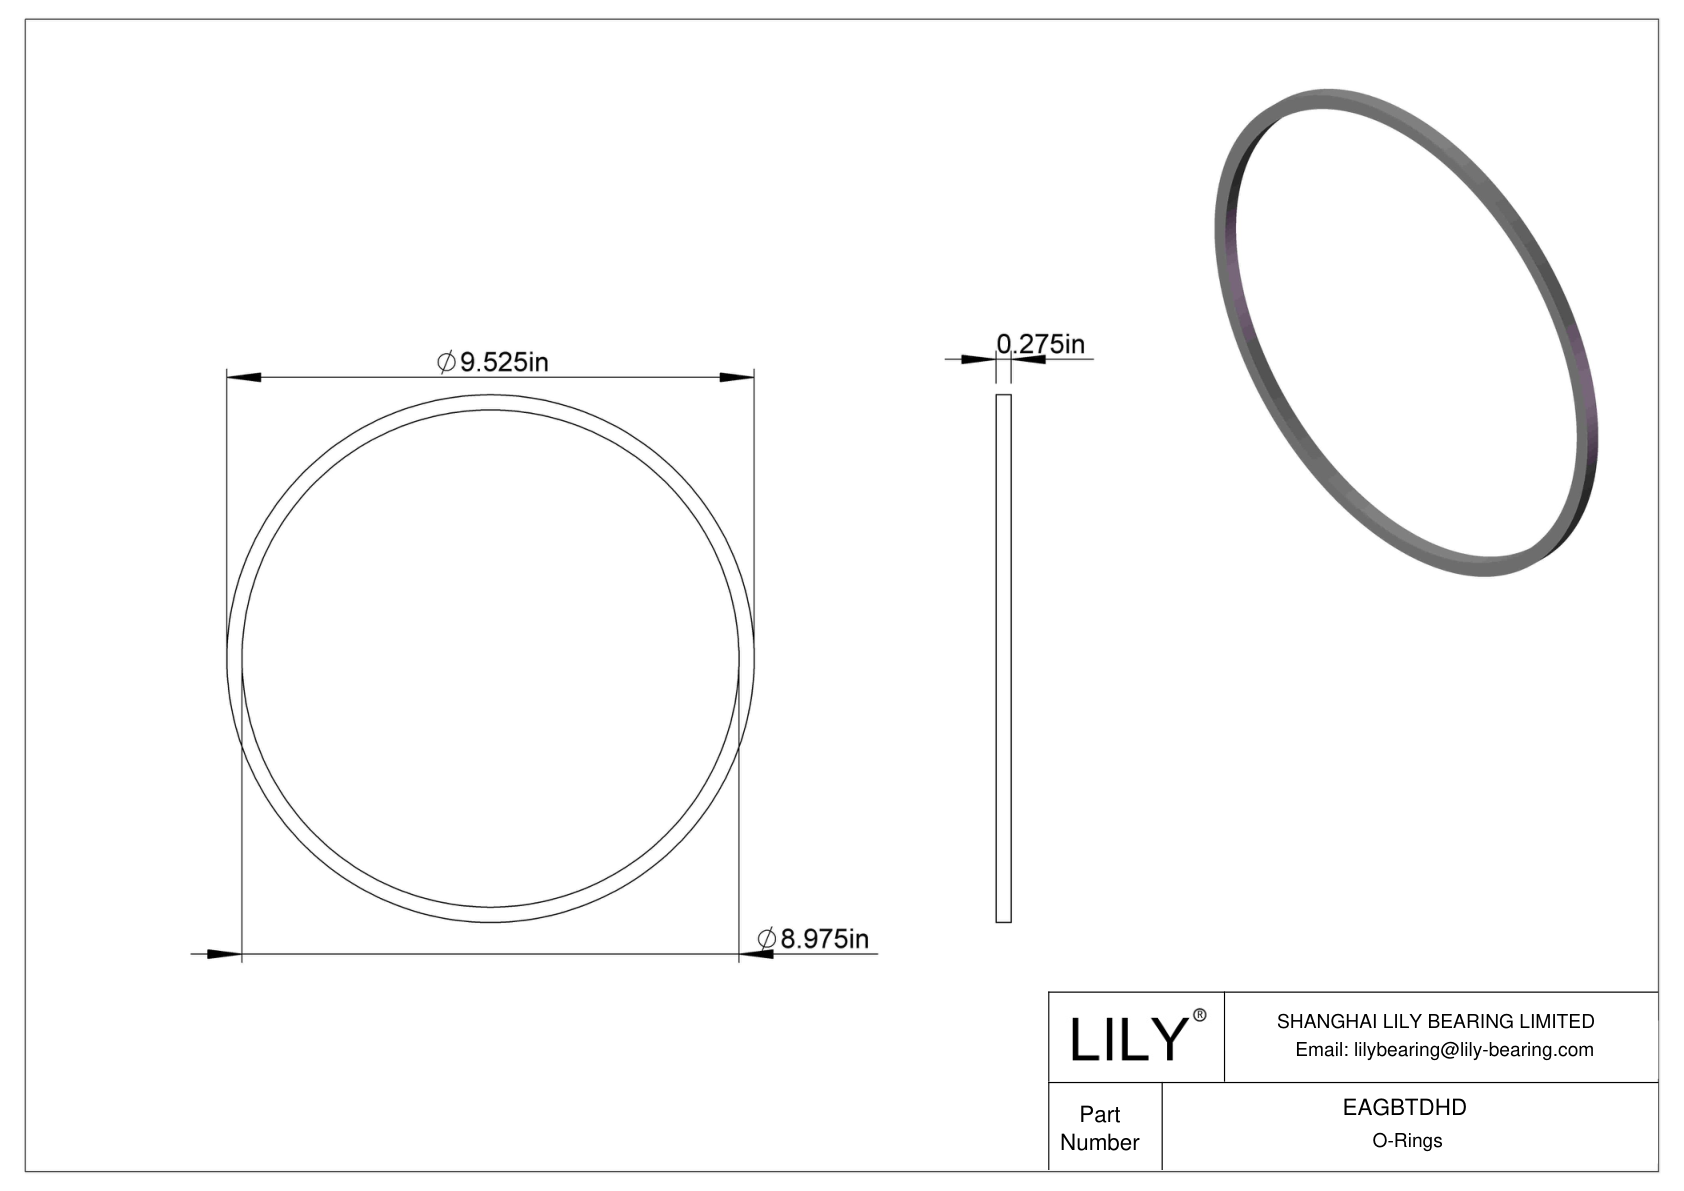 EAGBTDHD Oil Resistant O-Rings Square cad drawing